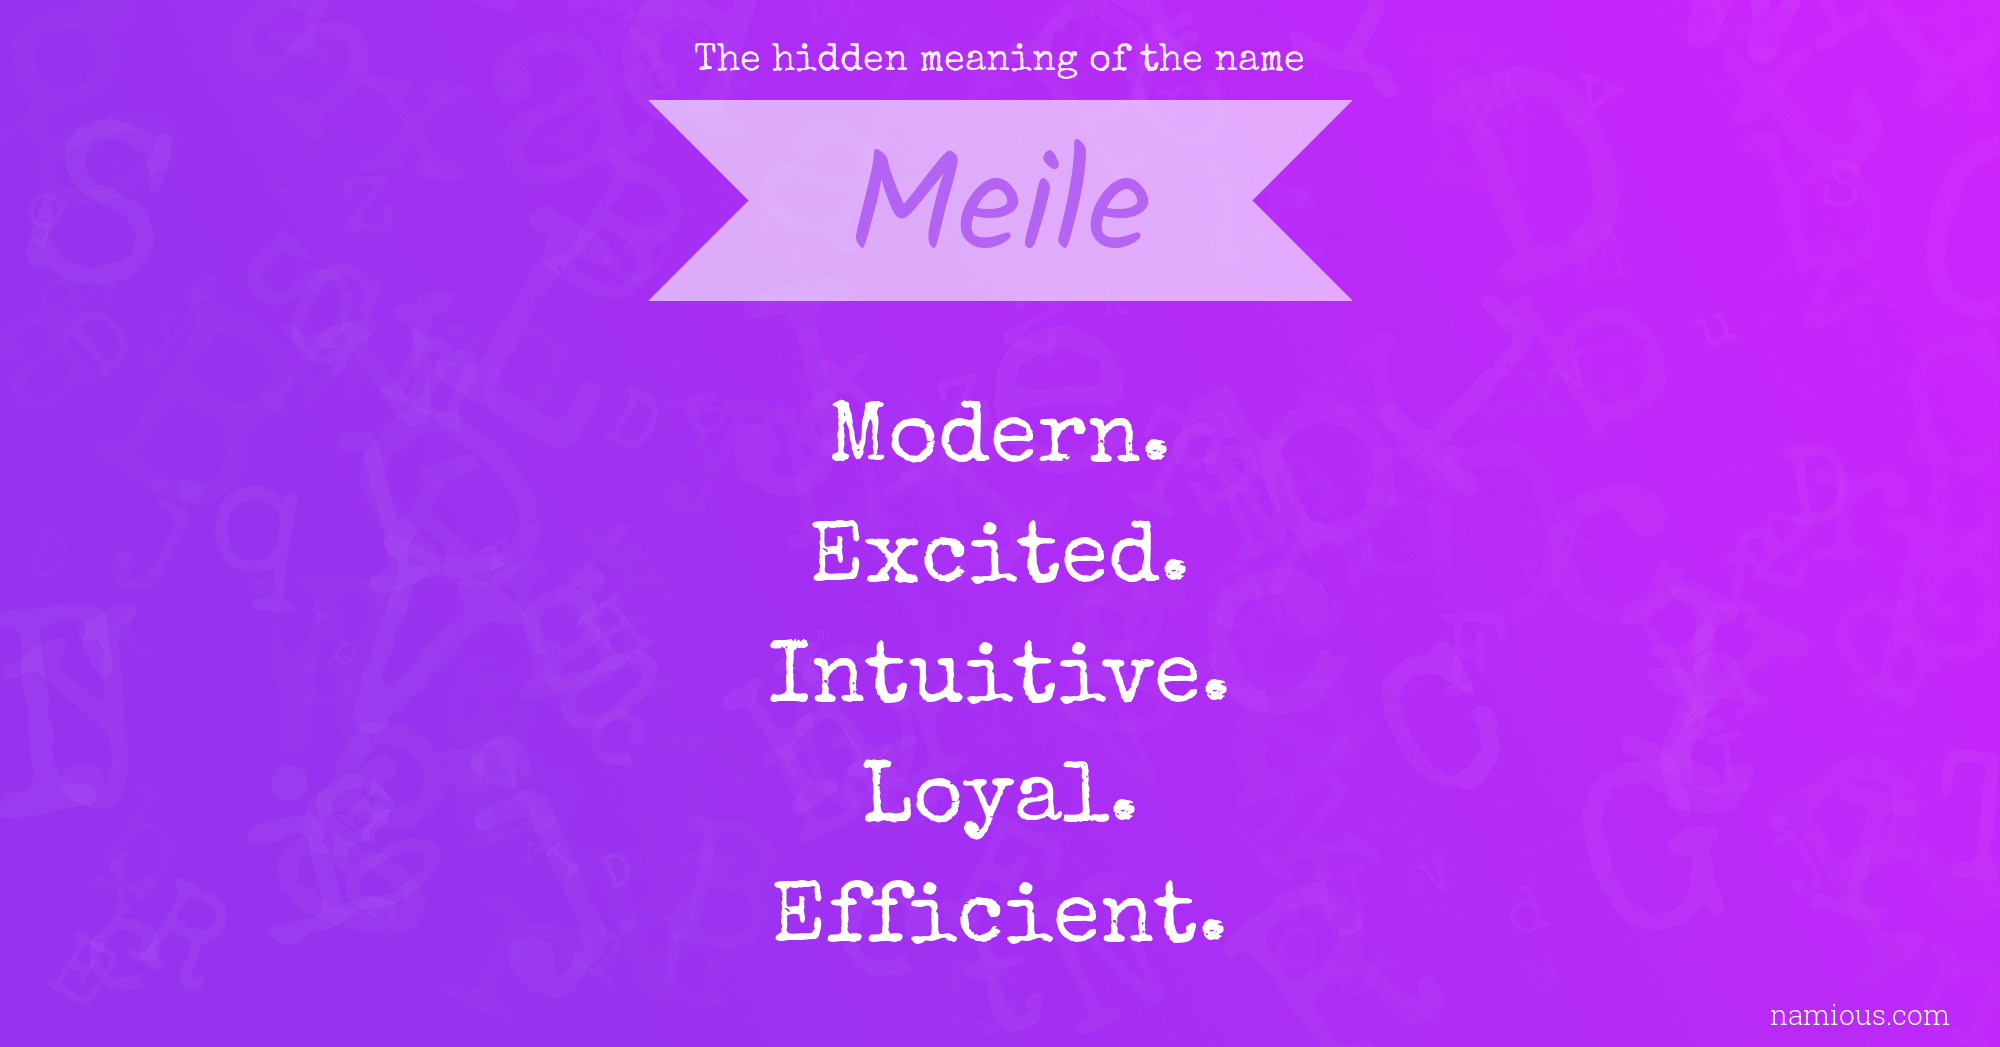 The hidden meaning of the name Meile